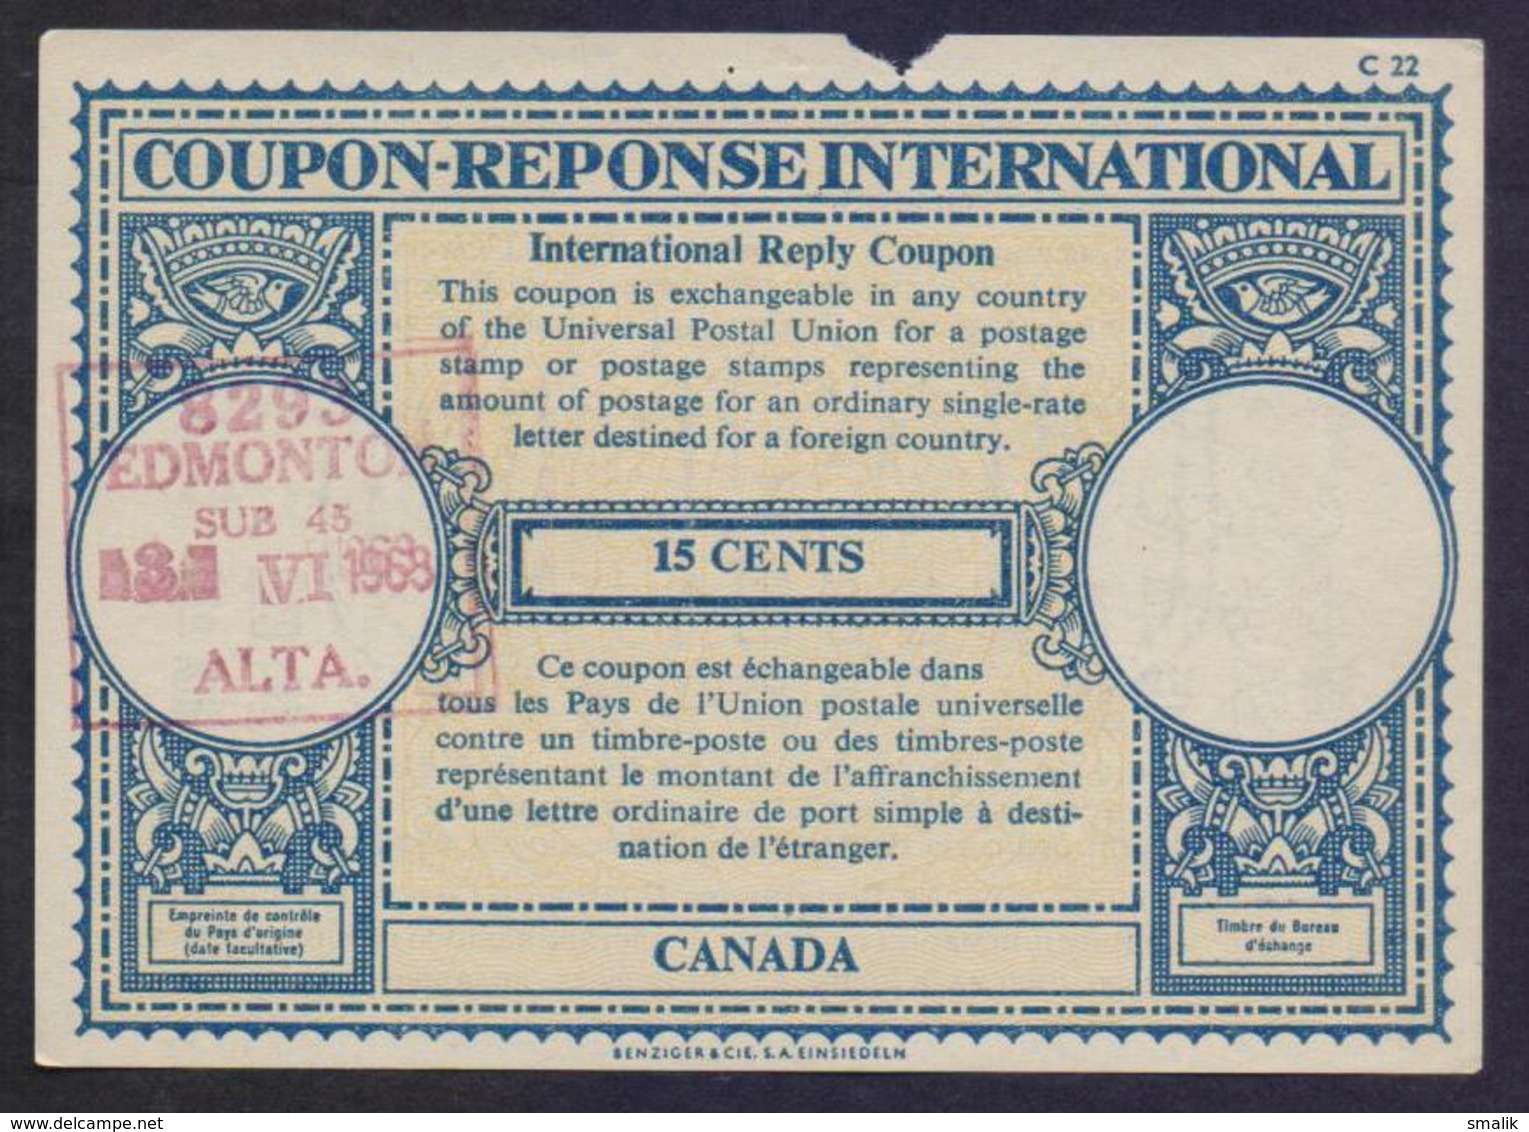 CANADA - 15 Cents London Type IRC COUPON REPONSE INTERNATIONAL REPLY, UPU, Cancelled 3.6.1968, Minor Broken - Antwoordcoupons